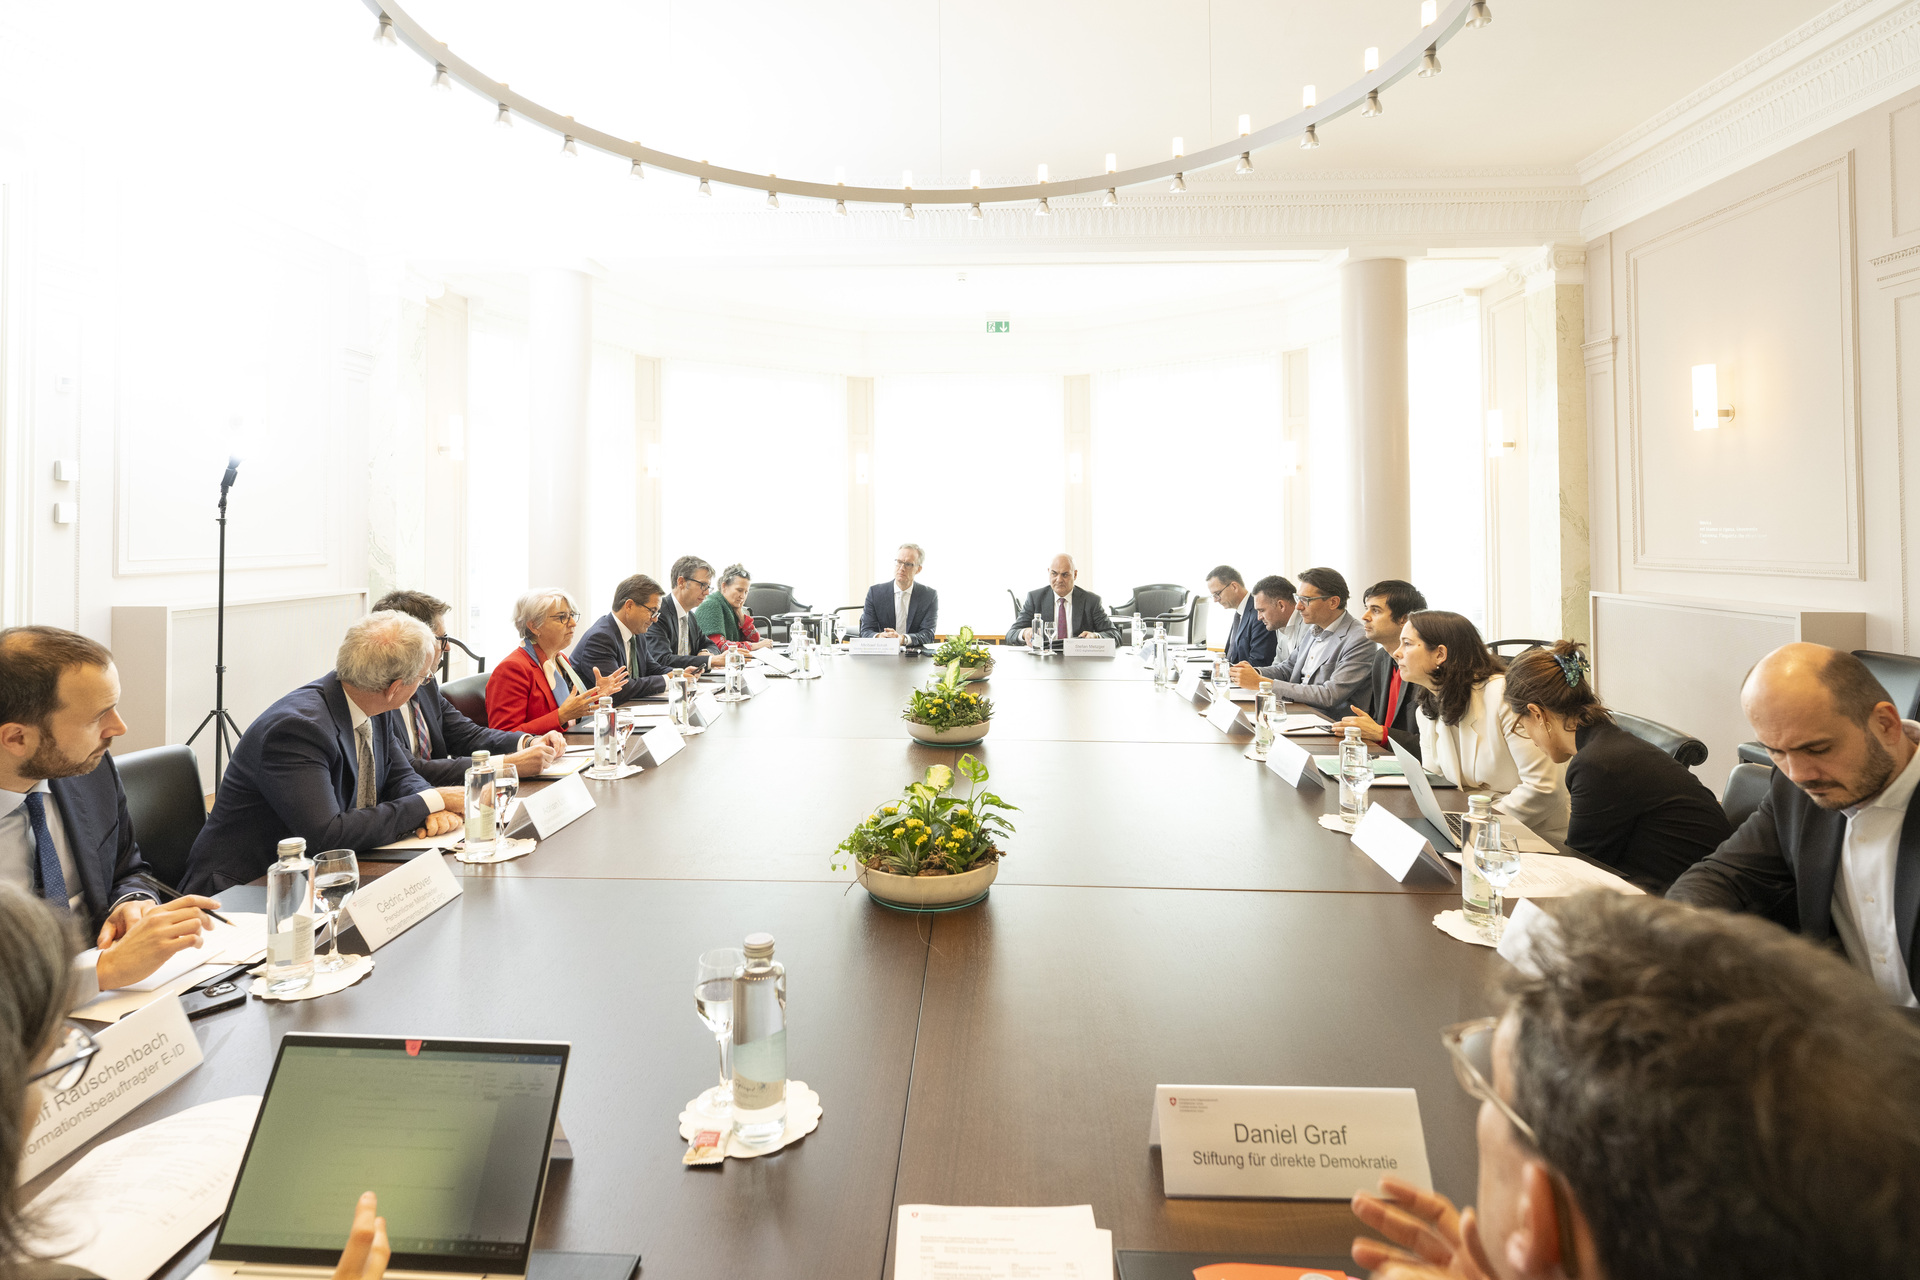 The Digital Switzerland Advisory Committee met on 20 November, with Federal Councillor Elisabeth Baume-Schneider chairing the meeting and Federal Chancellor Walter Thurnherr in attendance. At the meeting, representatives from politics, business, science and…